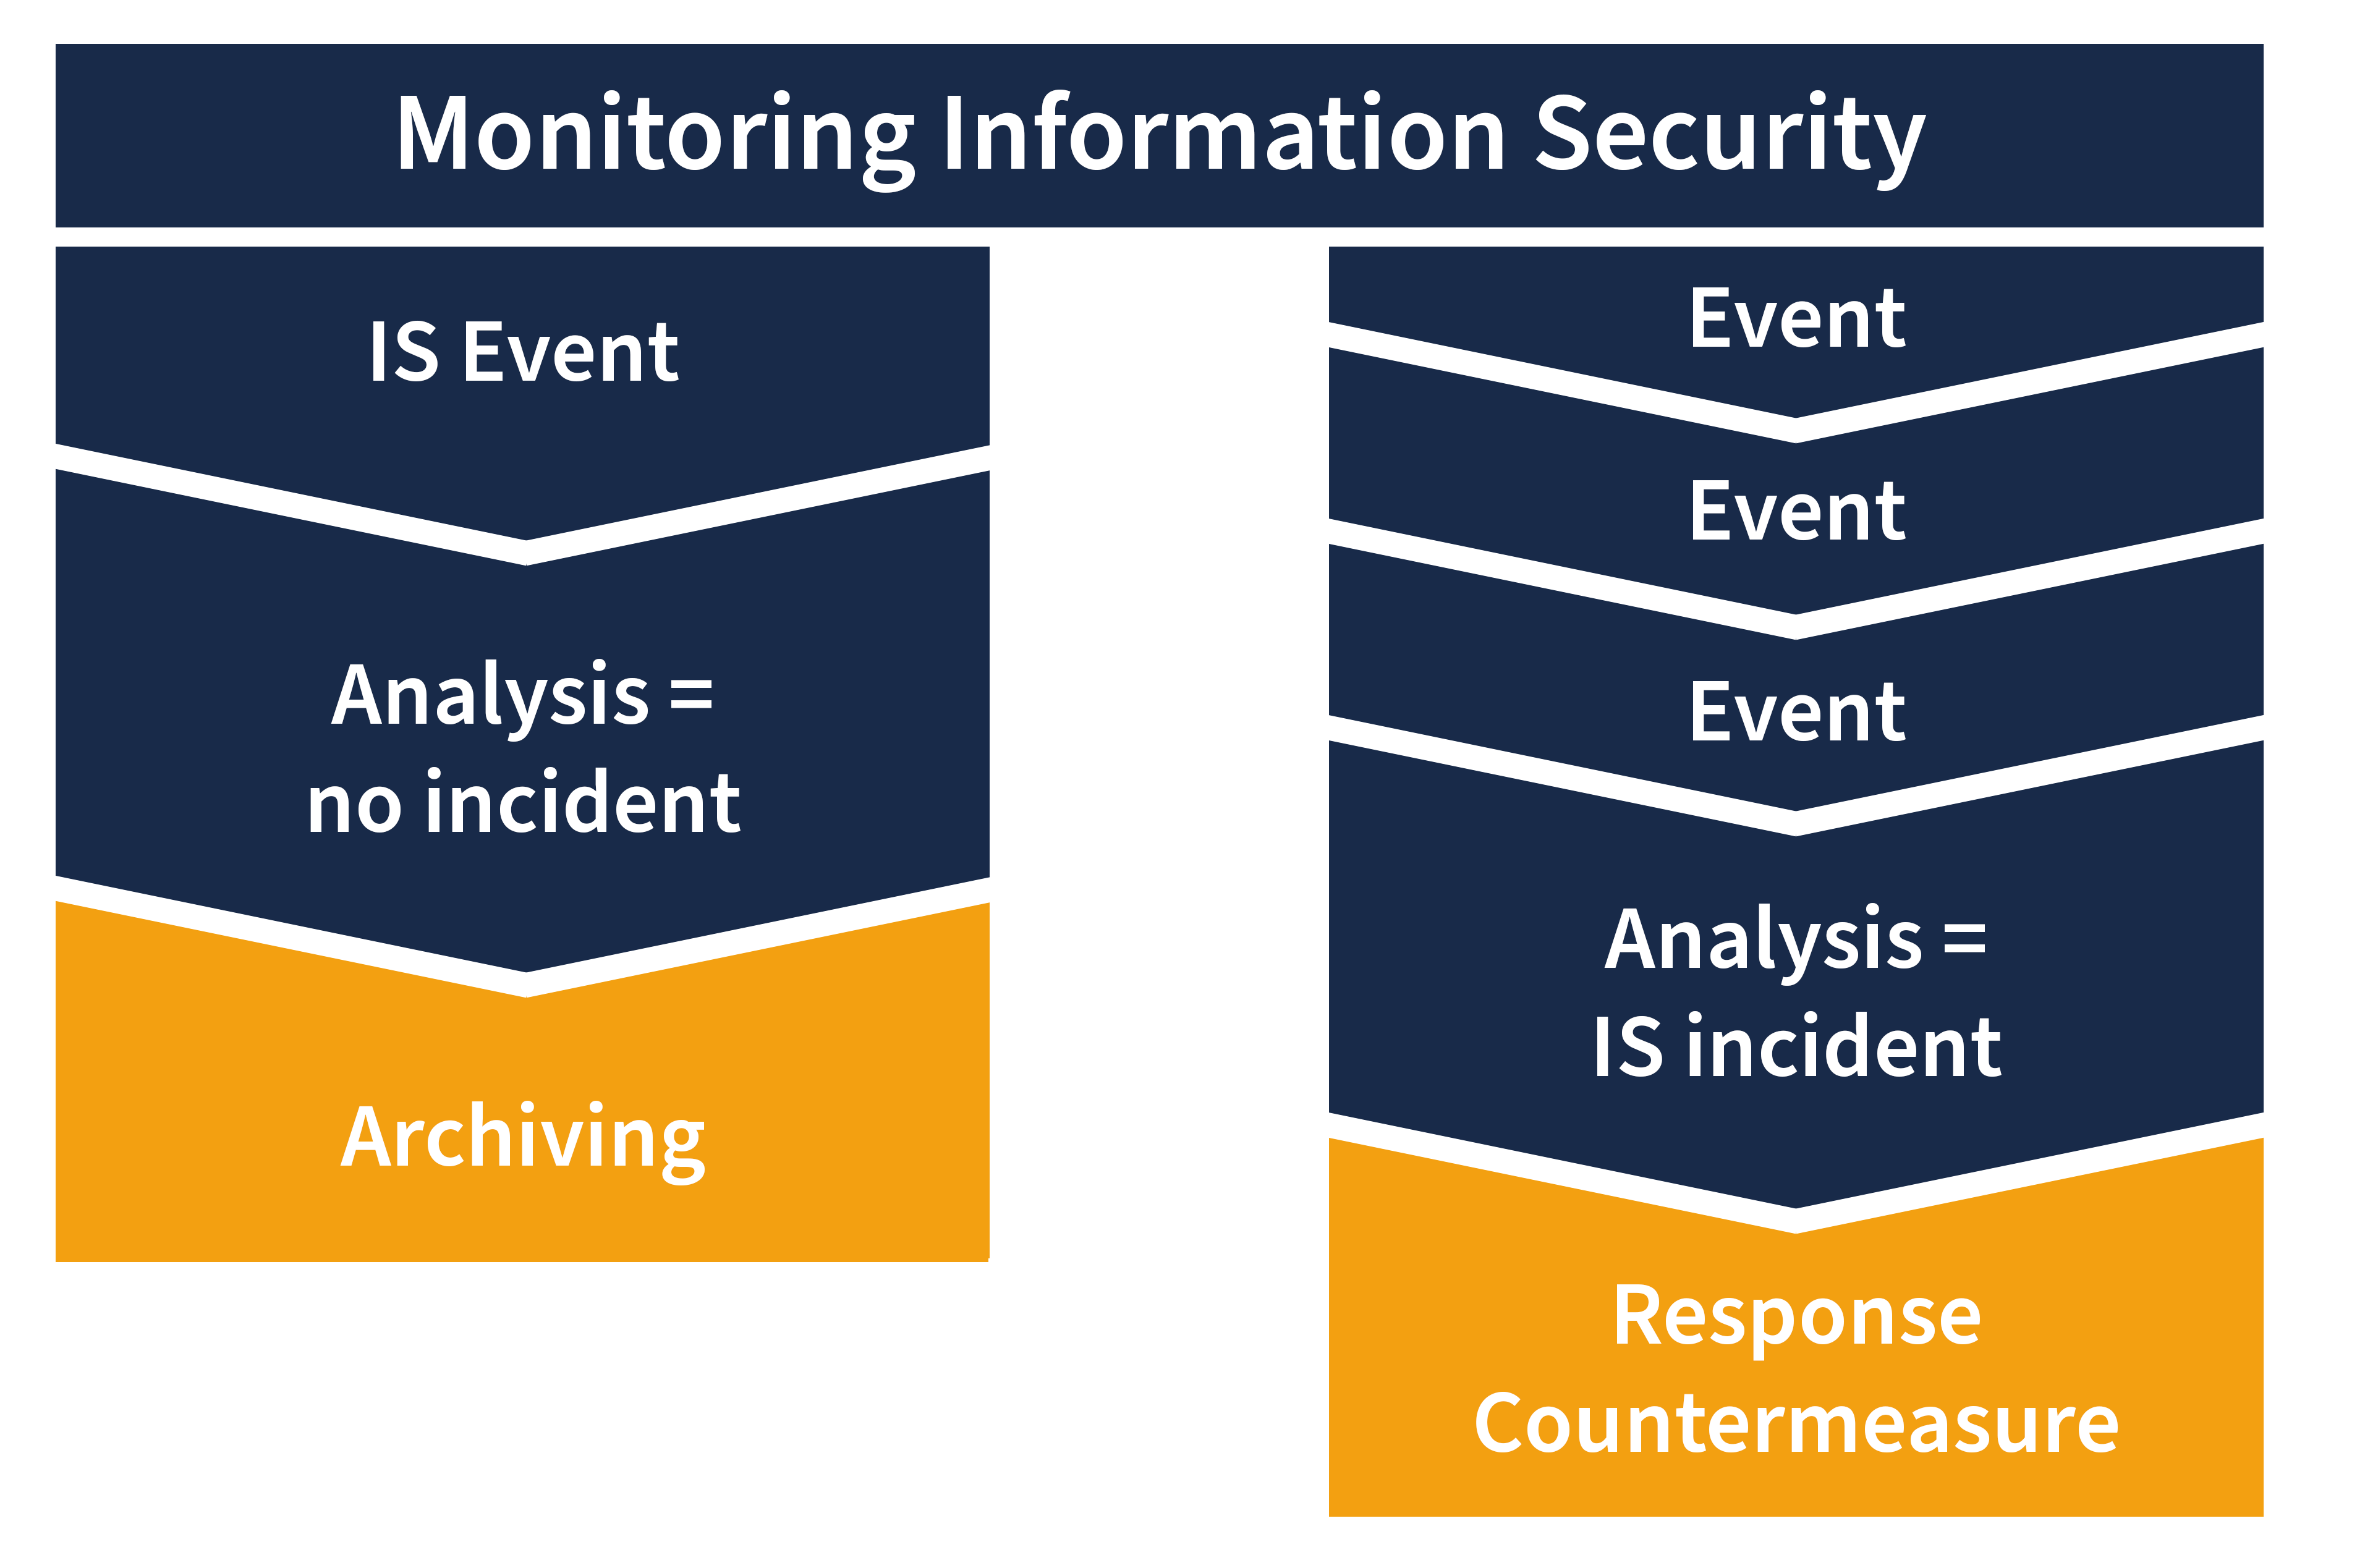 Correct handling of an information security incident